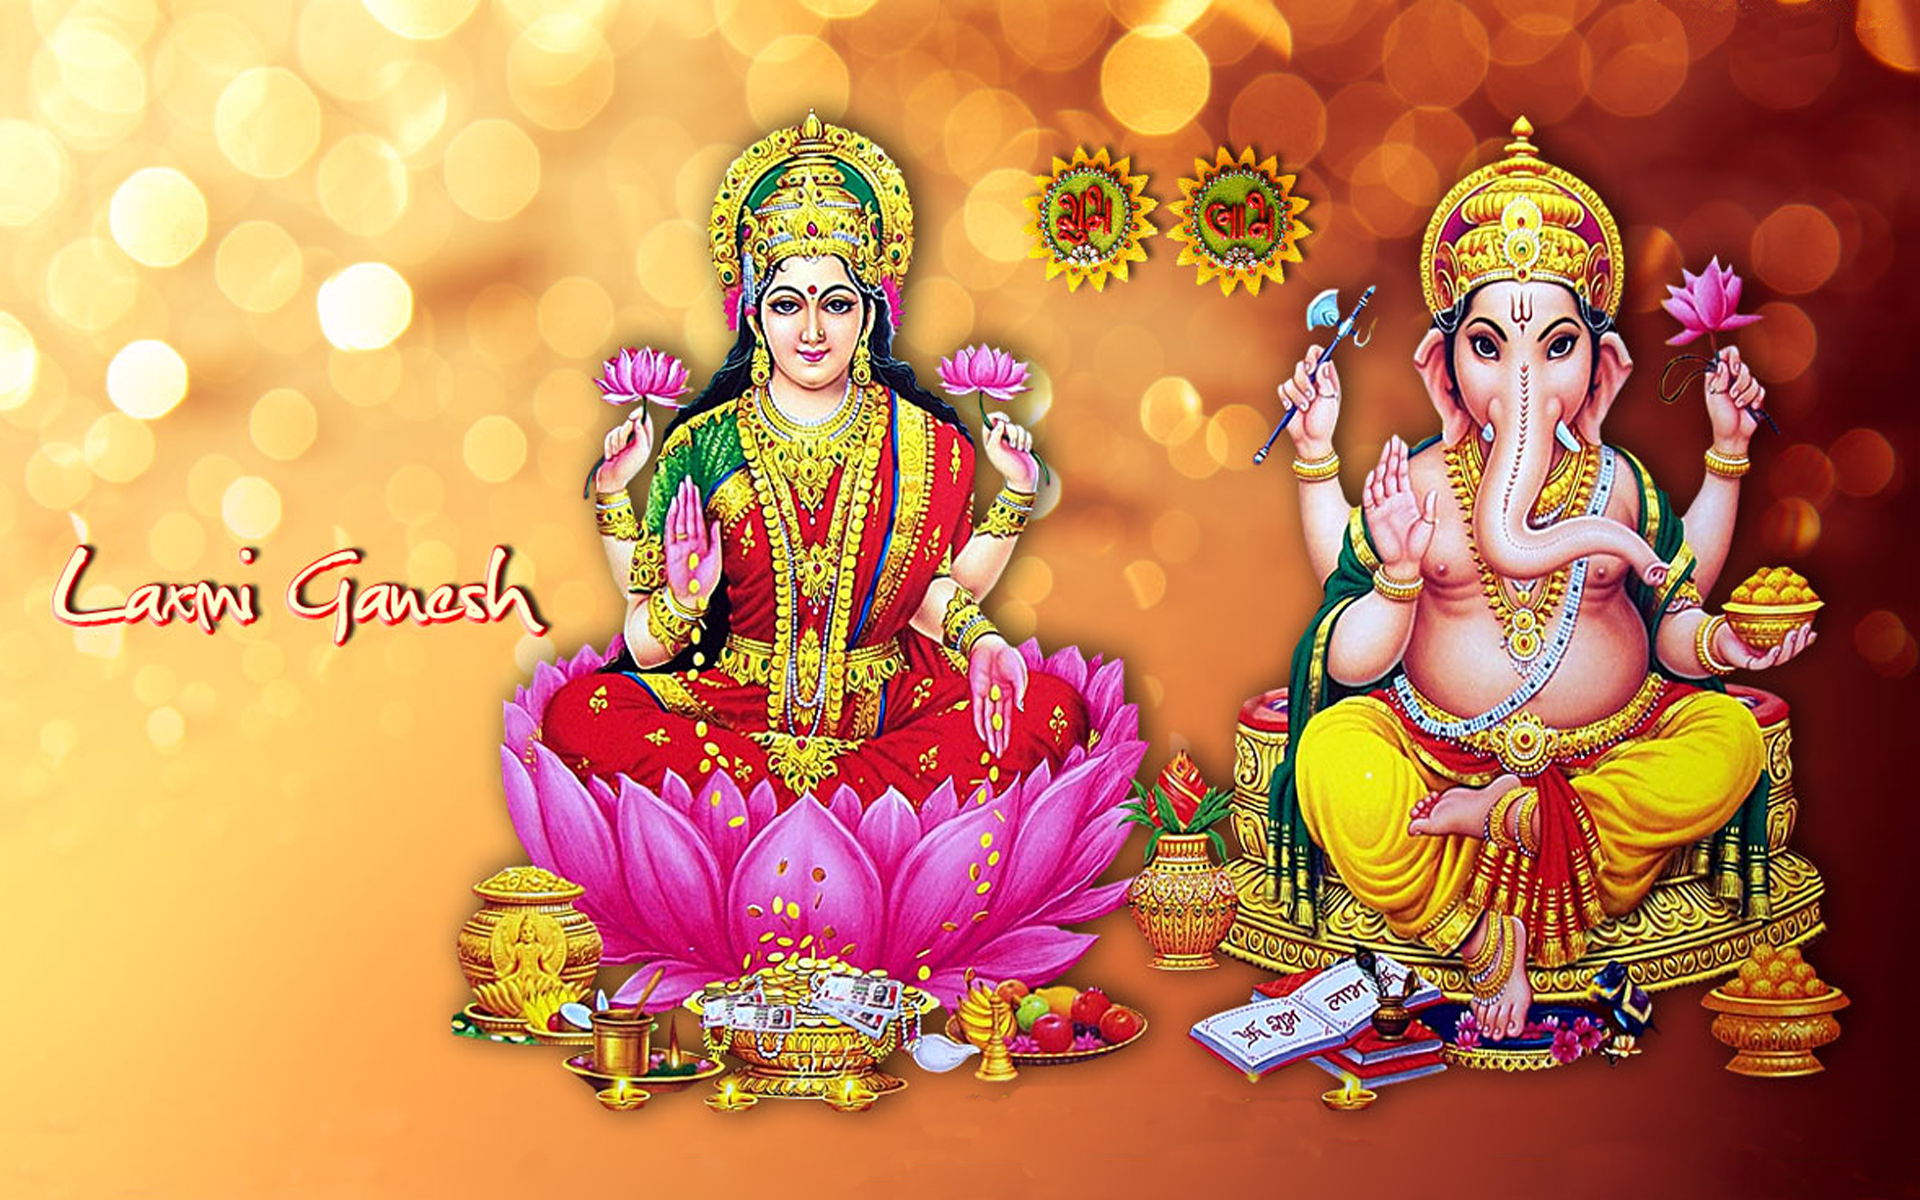 Laxmi Ganesh Hd Wallpaper Download For Mobile And Tablet 1920x1200 :  